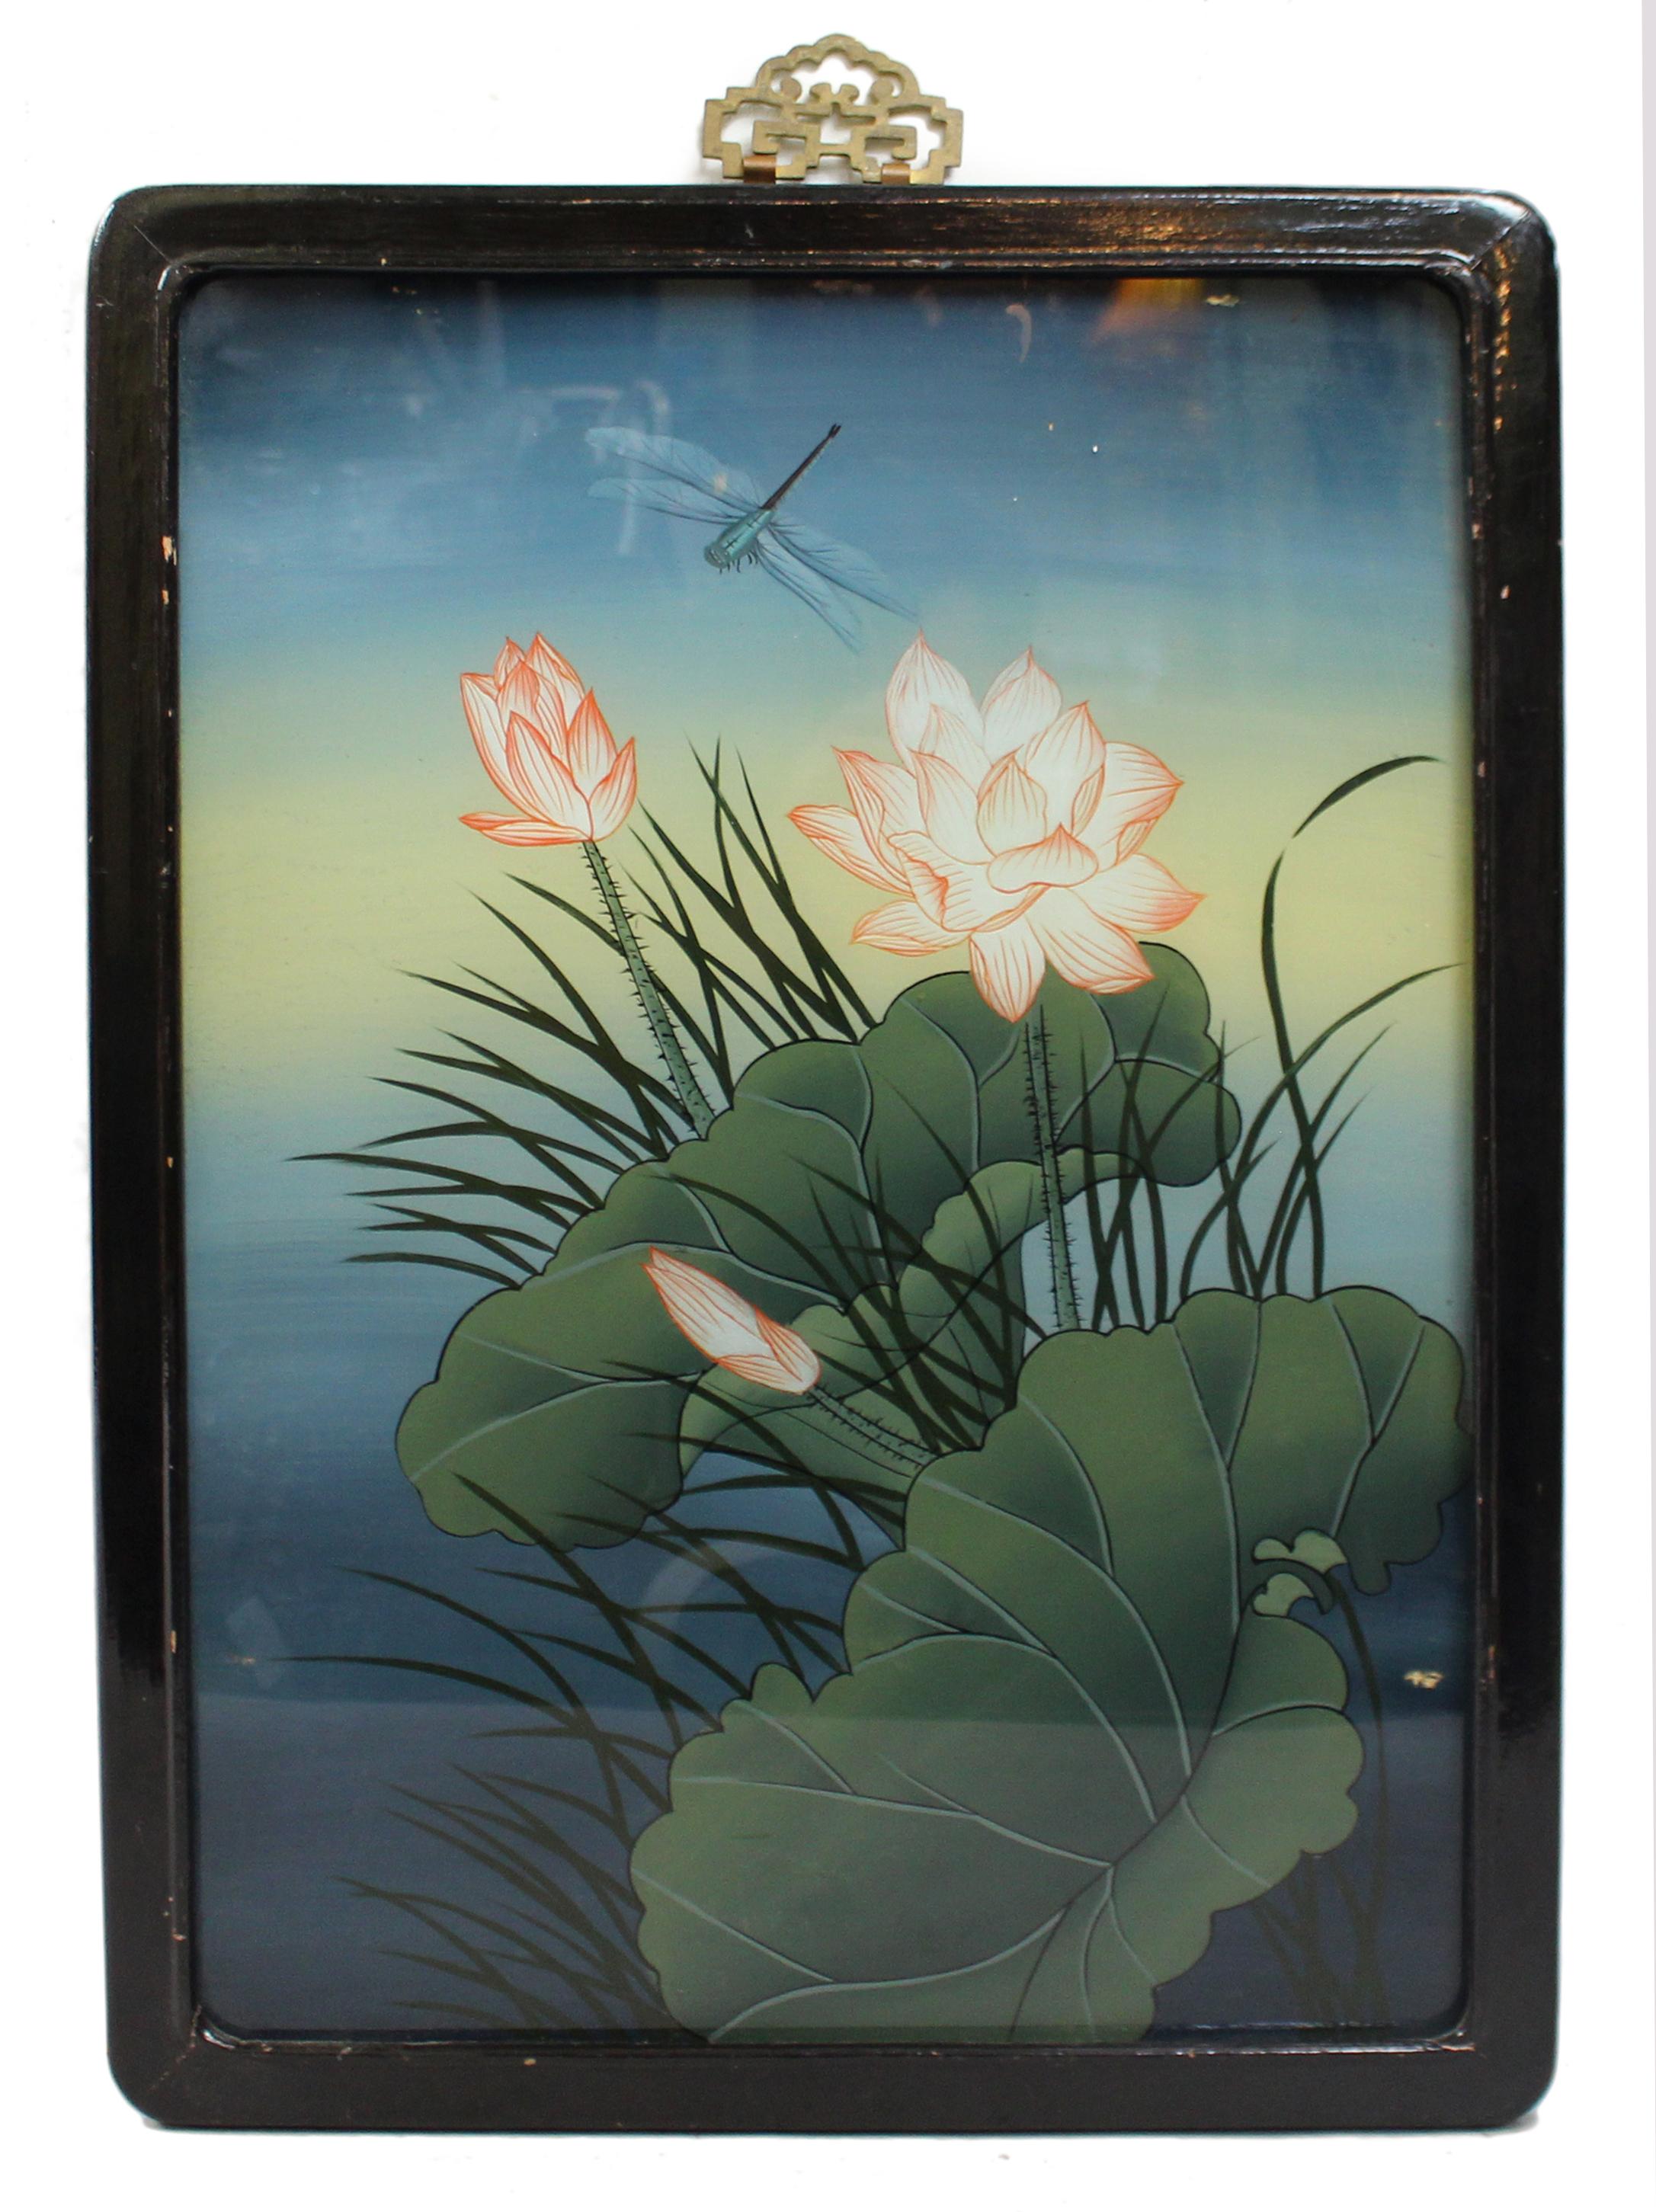 Chinese Export Reverse Glass Dragonfly painting


Chinese, early 20th century. 

Set behind glass in ebonized frame with brass decoration. 

Frame measures 45 x 64 cm. 

Good condition. Little wear to painting. Few marks to frame as